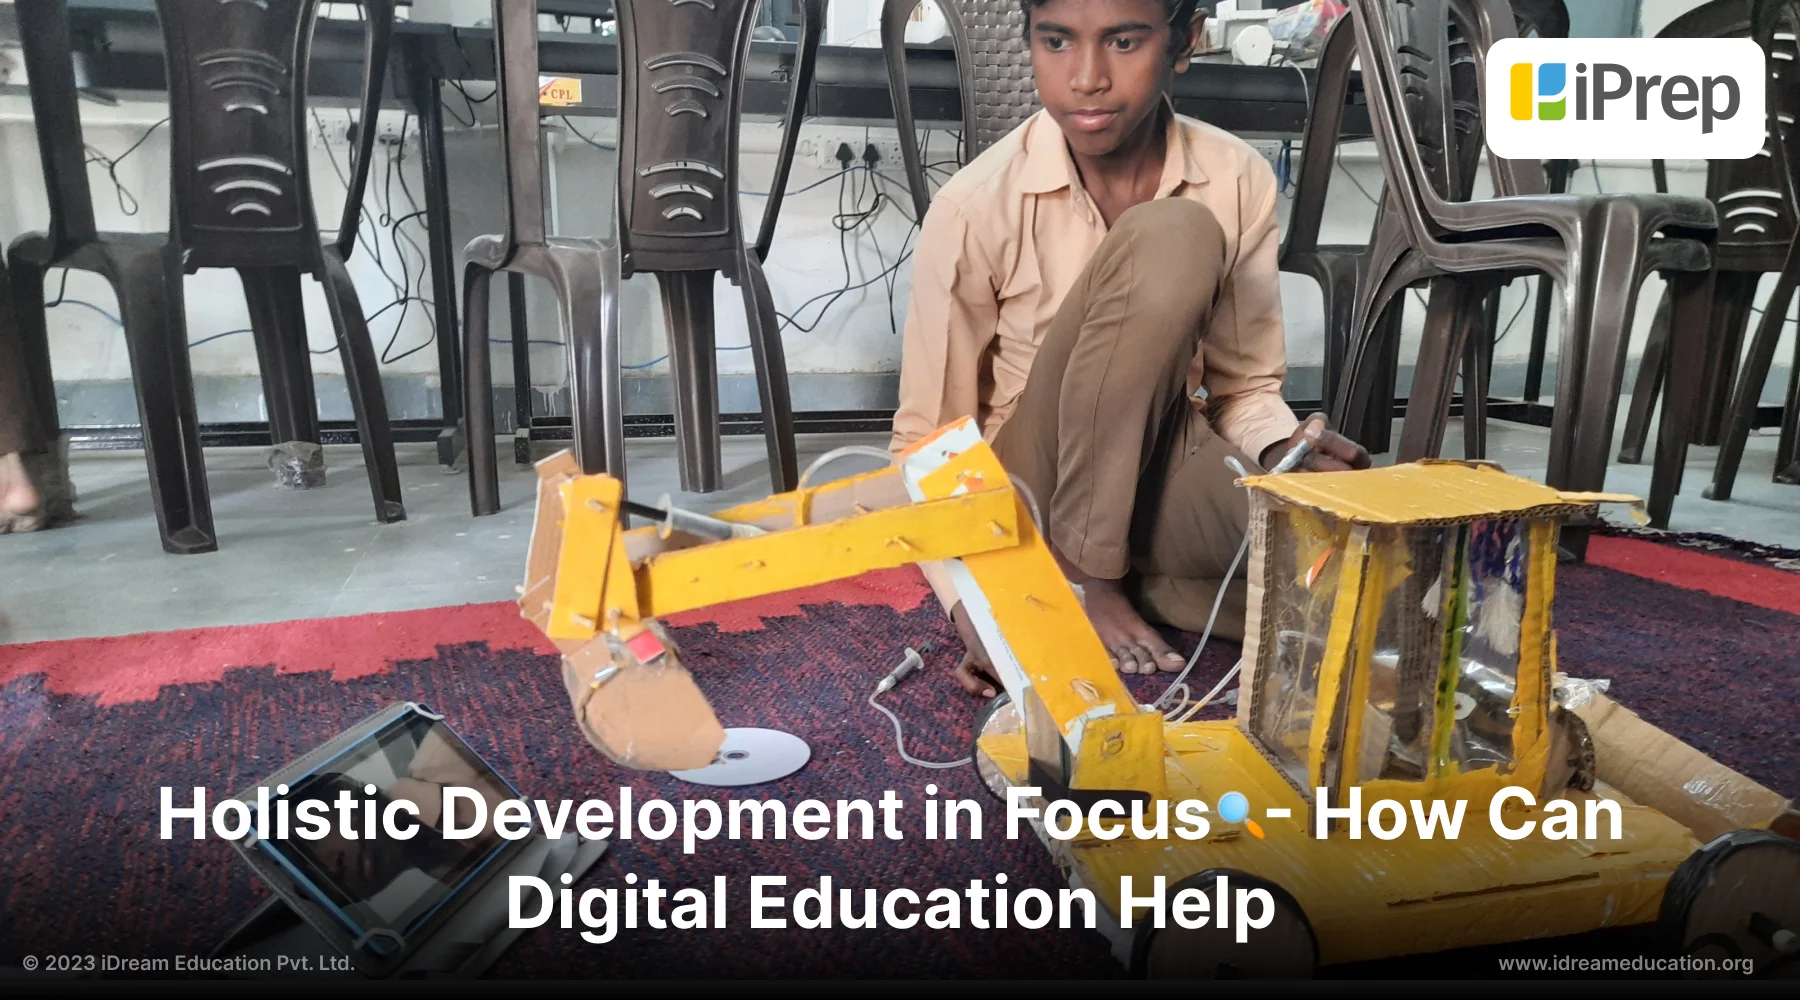 A visual of how digital learning solutions like the iPrep tablets can foster holistic development in students